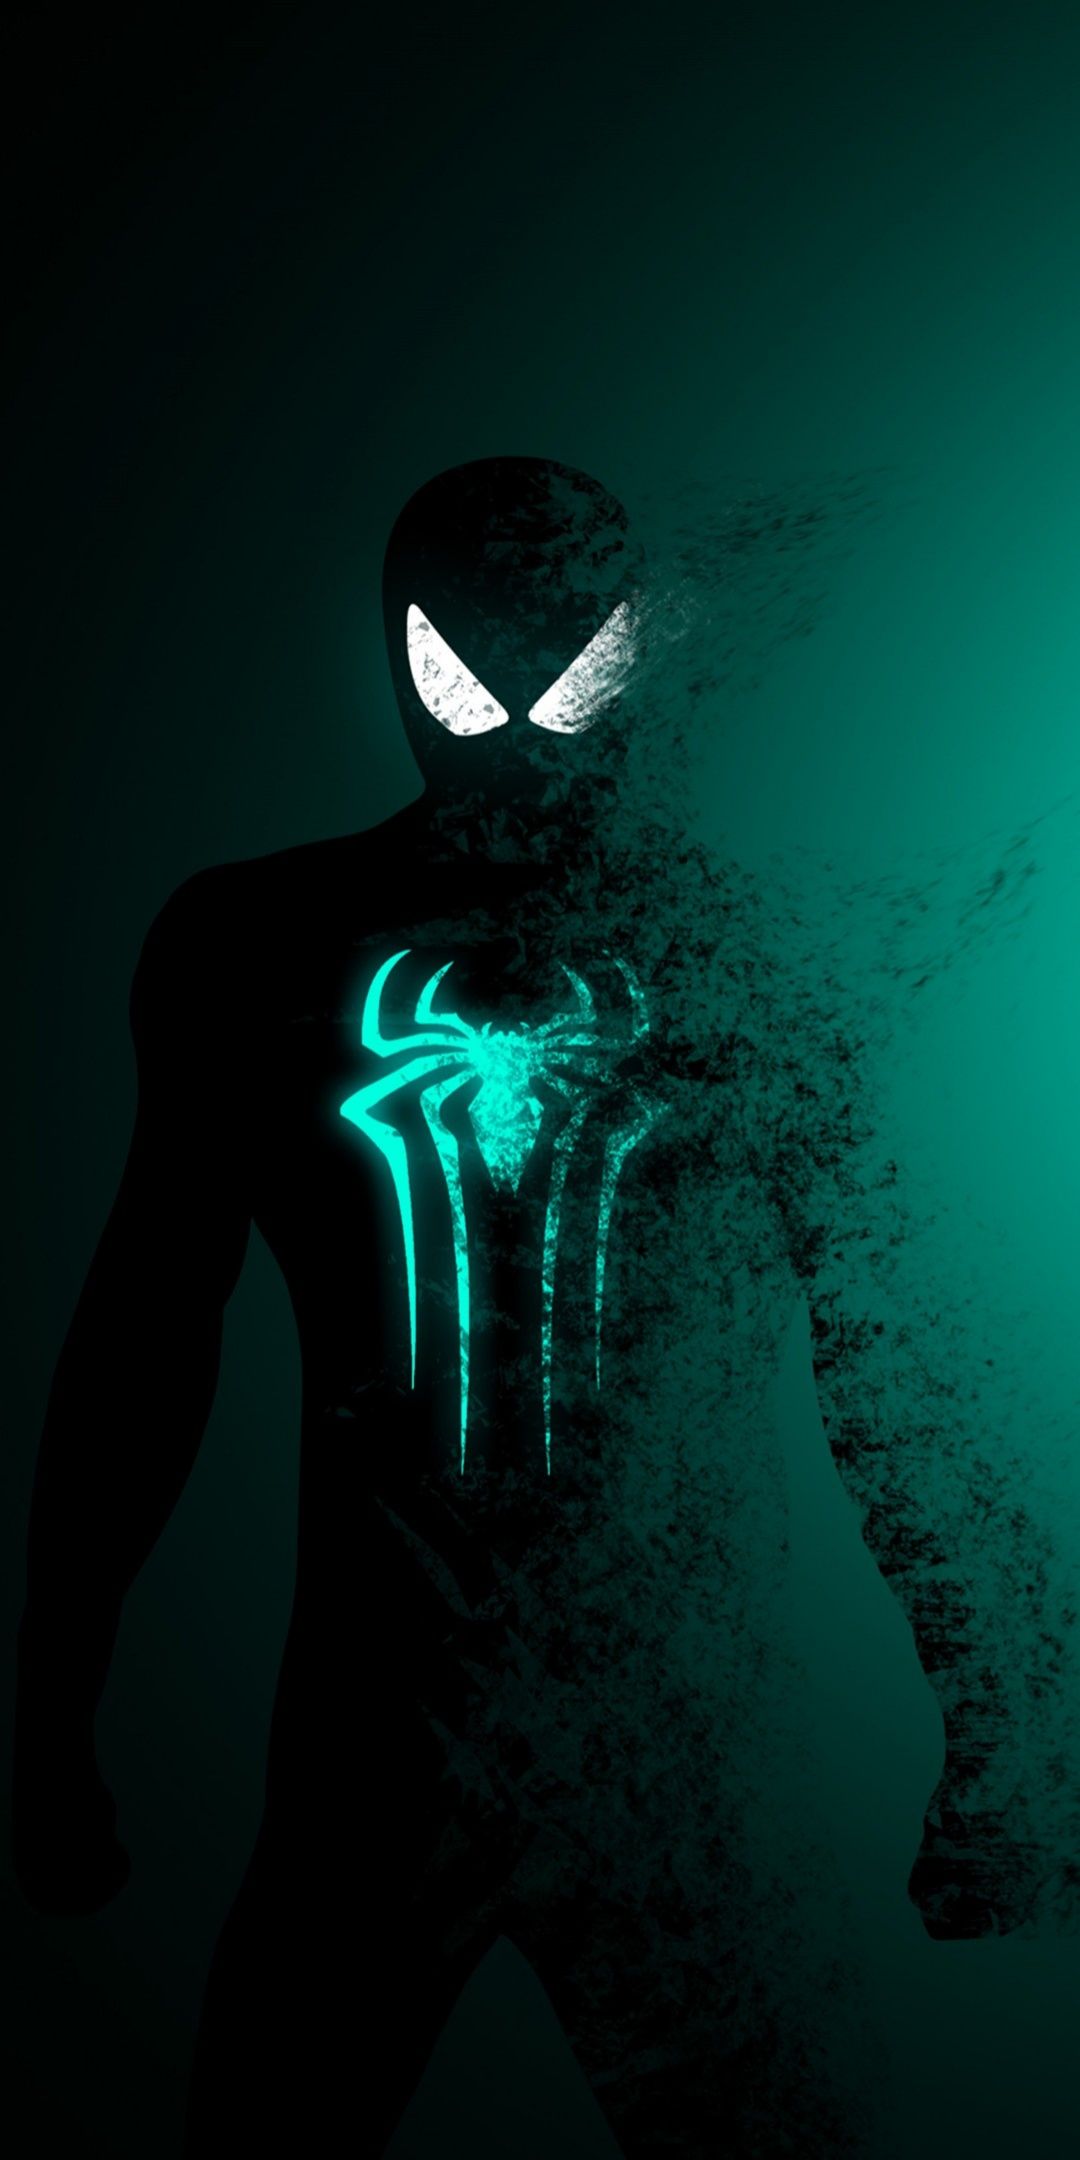 Wallpaper Share Download SuperHeroes Amoled Wallpaper For Your